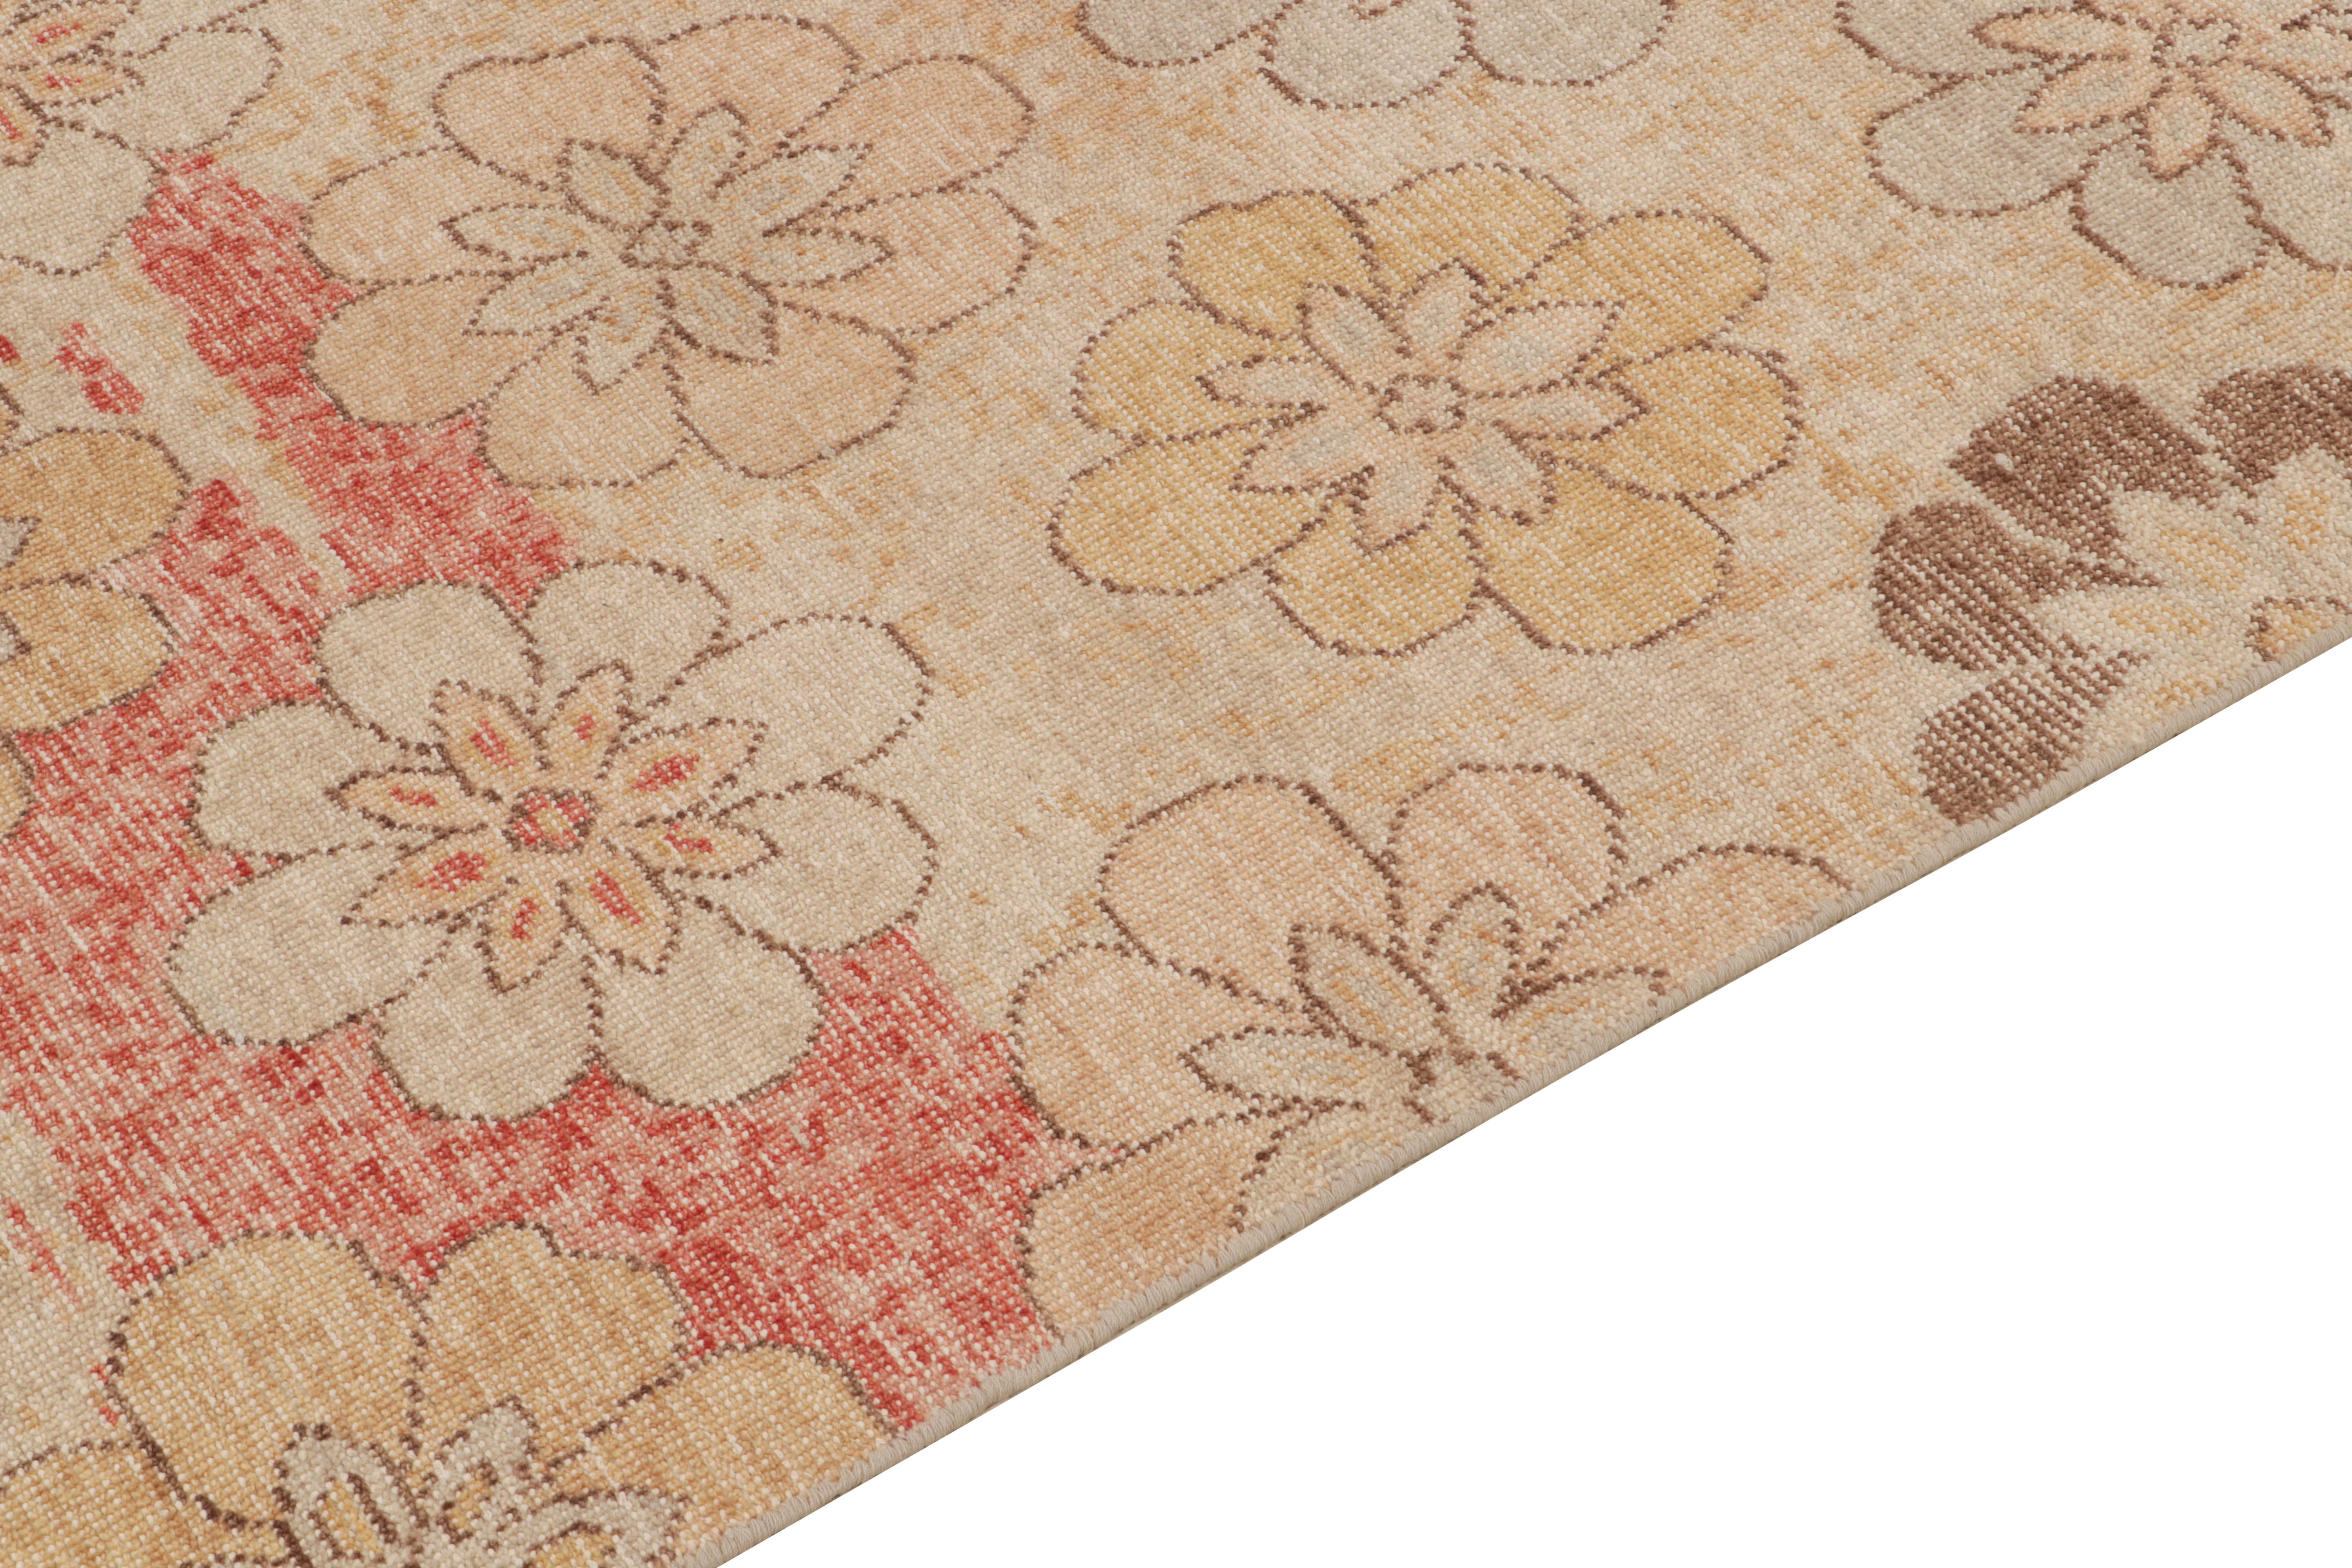 Indian Rug & Kilim's Distressed 1960s Style Rug in Beige, Red & Blue Floral Patterns For Sale